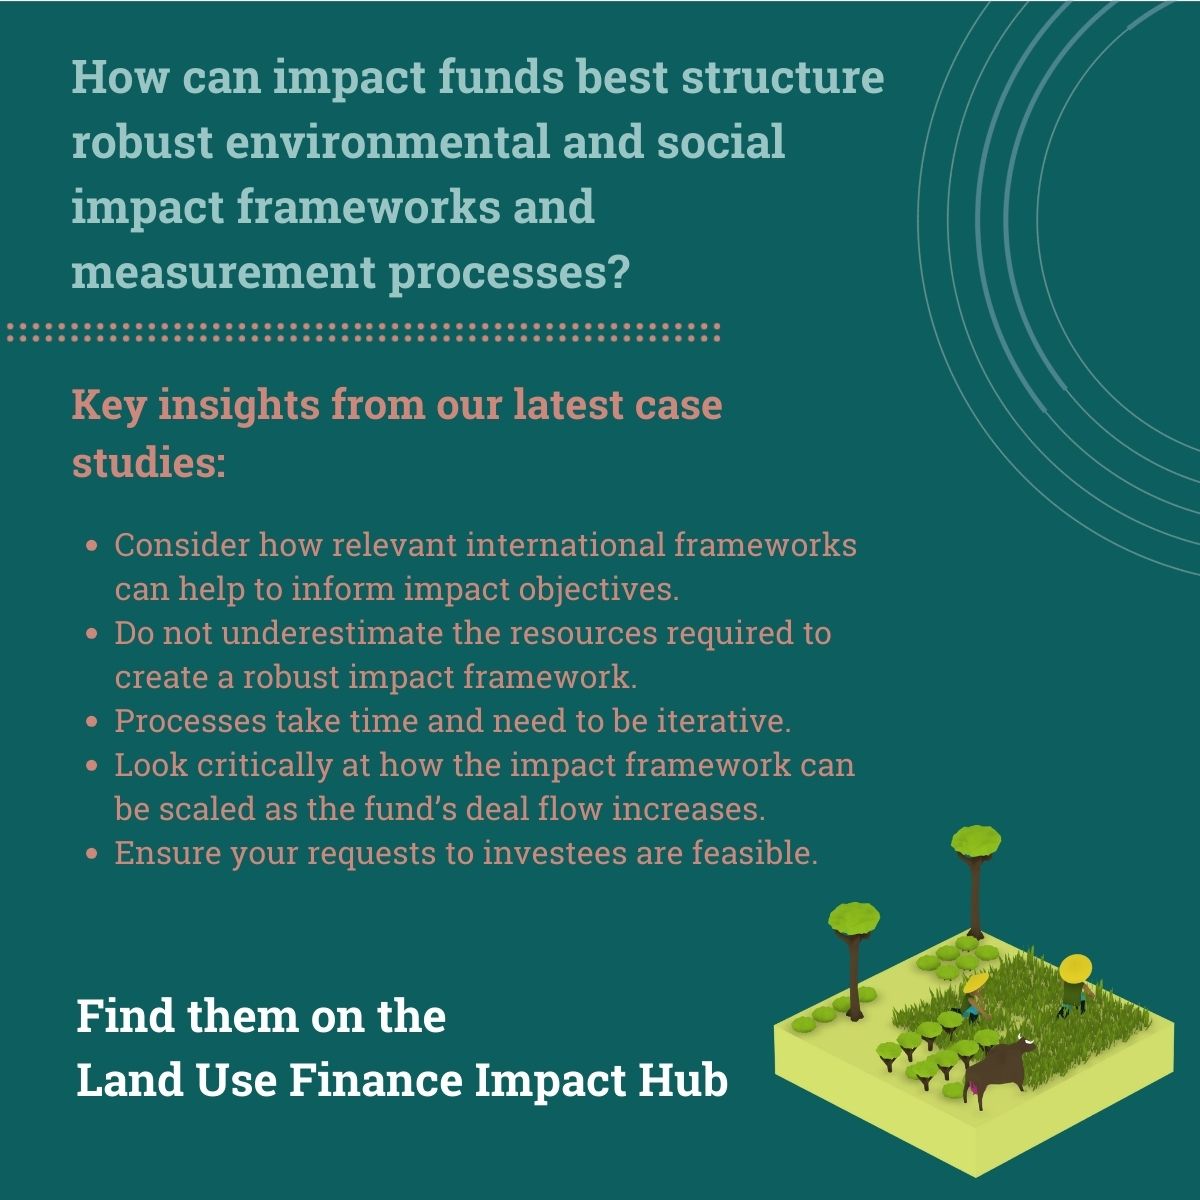 To mobilise more private investment #ForNature to achieve the #GBF Target 19, it is vital for investments to be governed by robust impact frameworks to manage their environmental and social risks and impacts. Learn more from our case studies with UNEP: eu1.hubs.ly/H08QMGm0